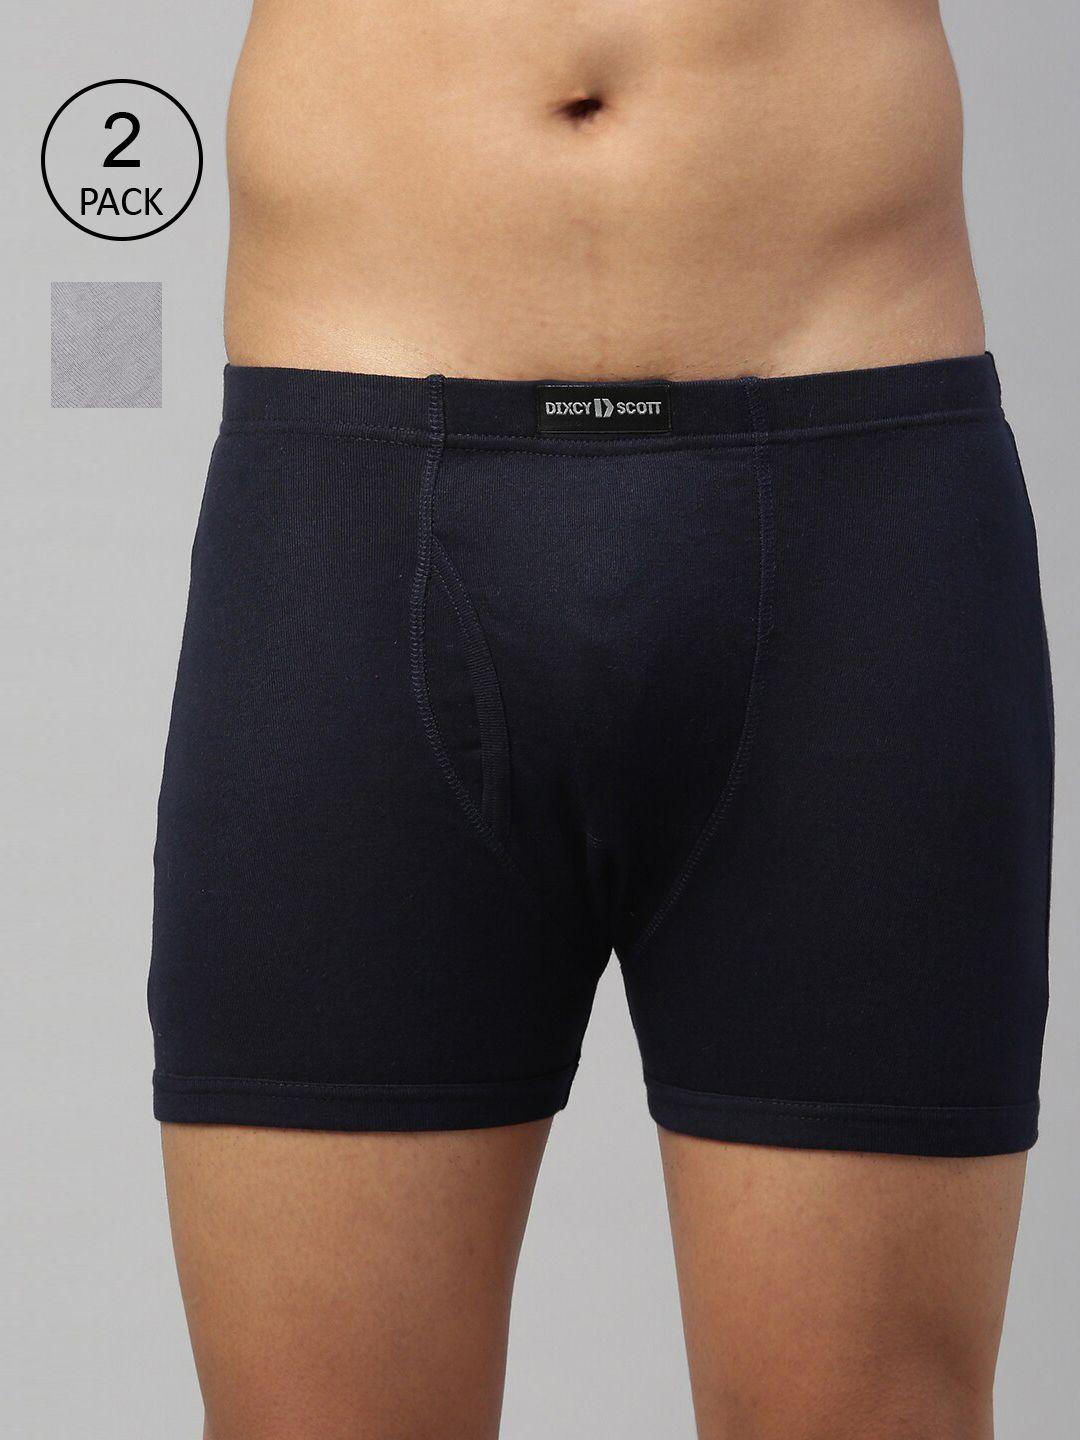 dixcy scott maximus men pack of 2 solid cotton trunks maxt-002-dynamic trunk